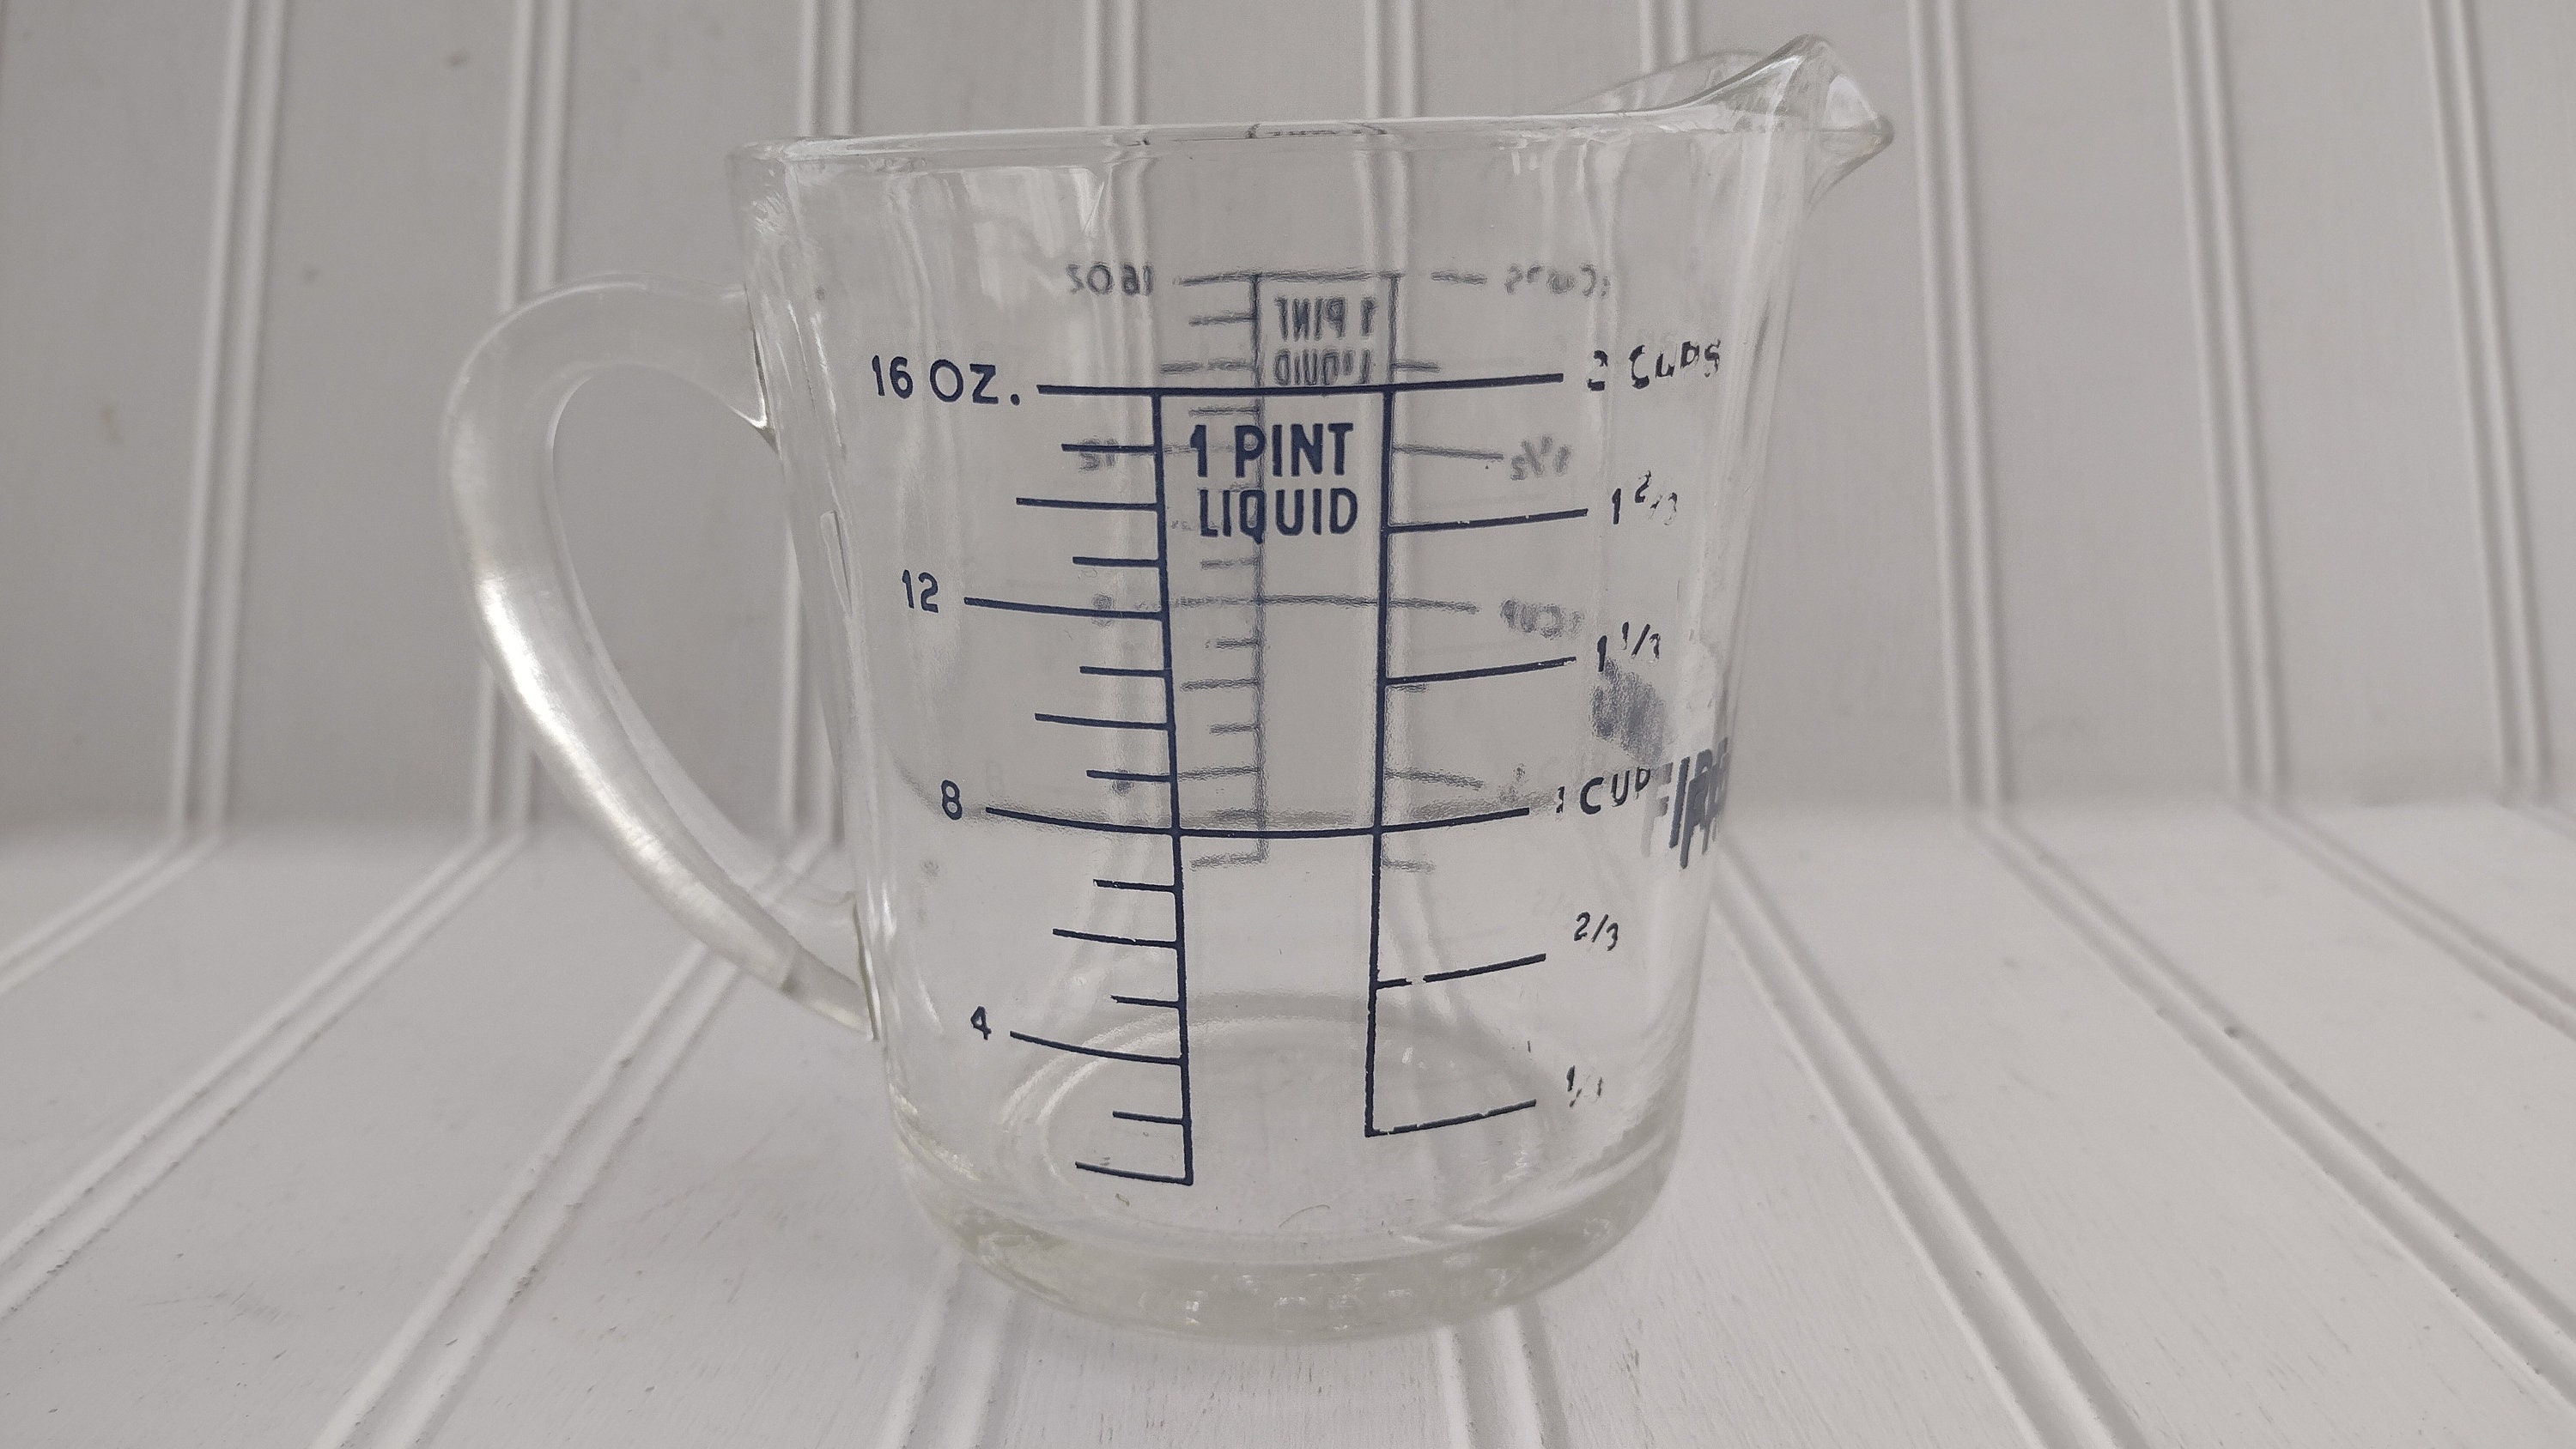 Small Vintage Soviet Measuring Cup Vintage 100ml Measuring Cups Jewelry  Making 10098325 